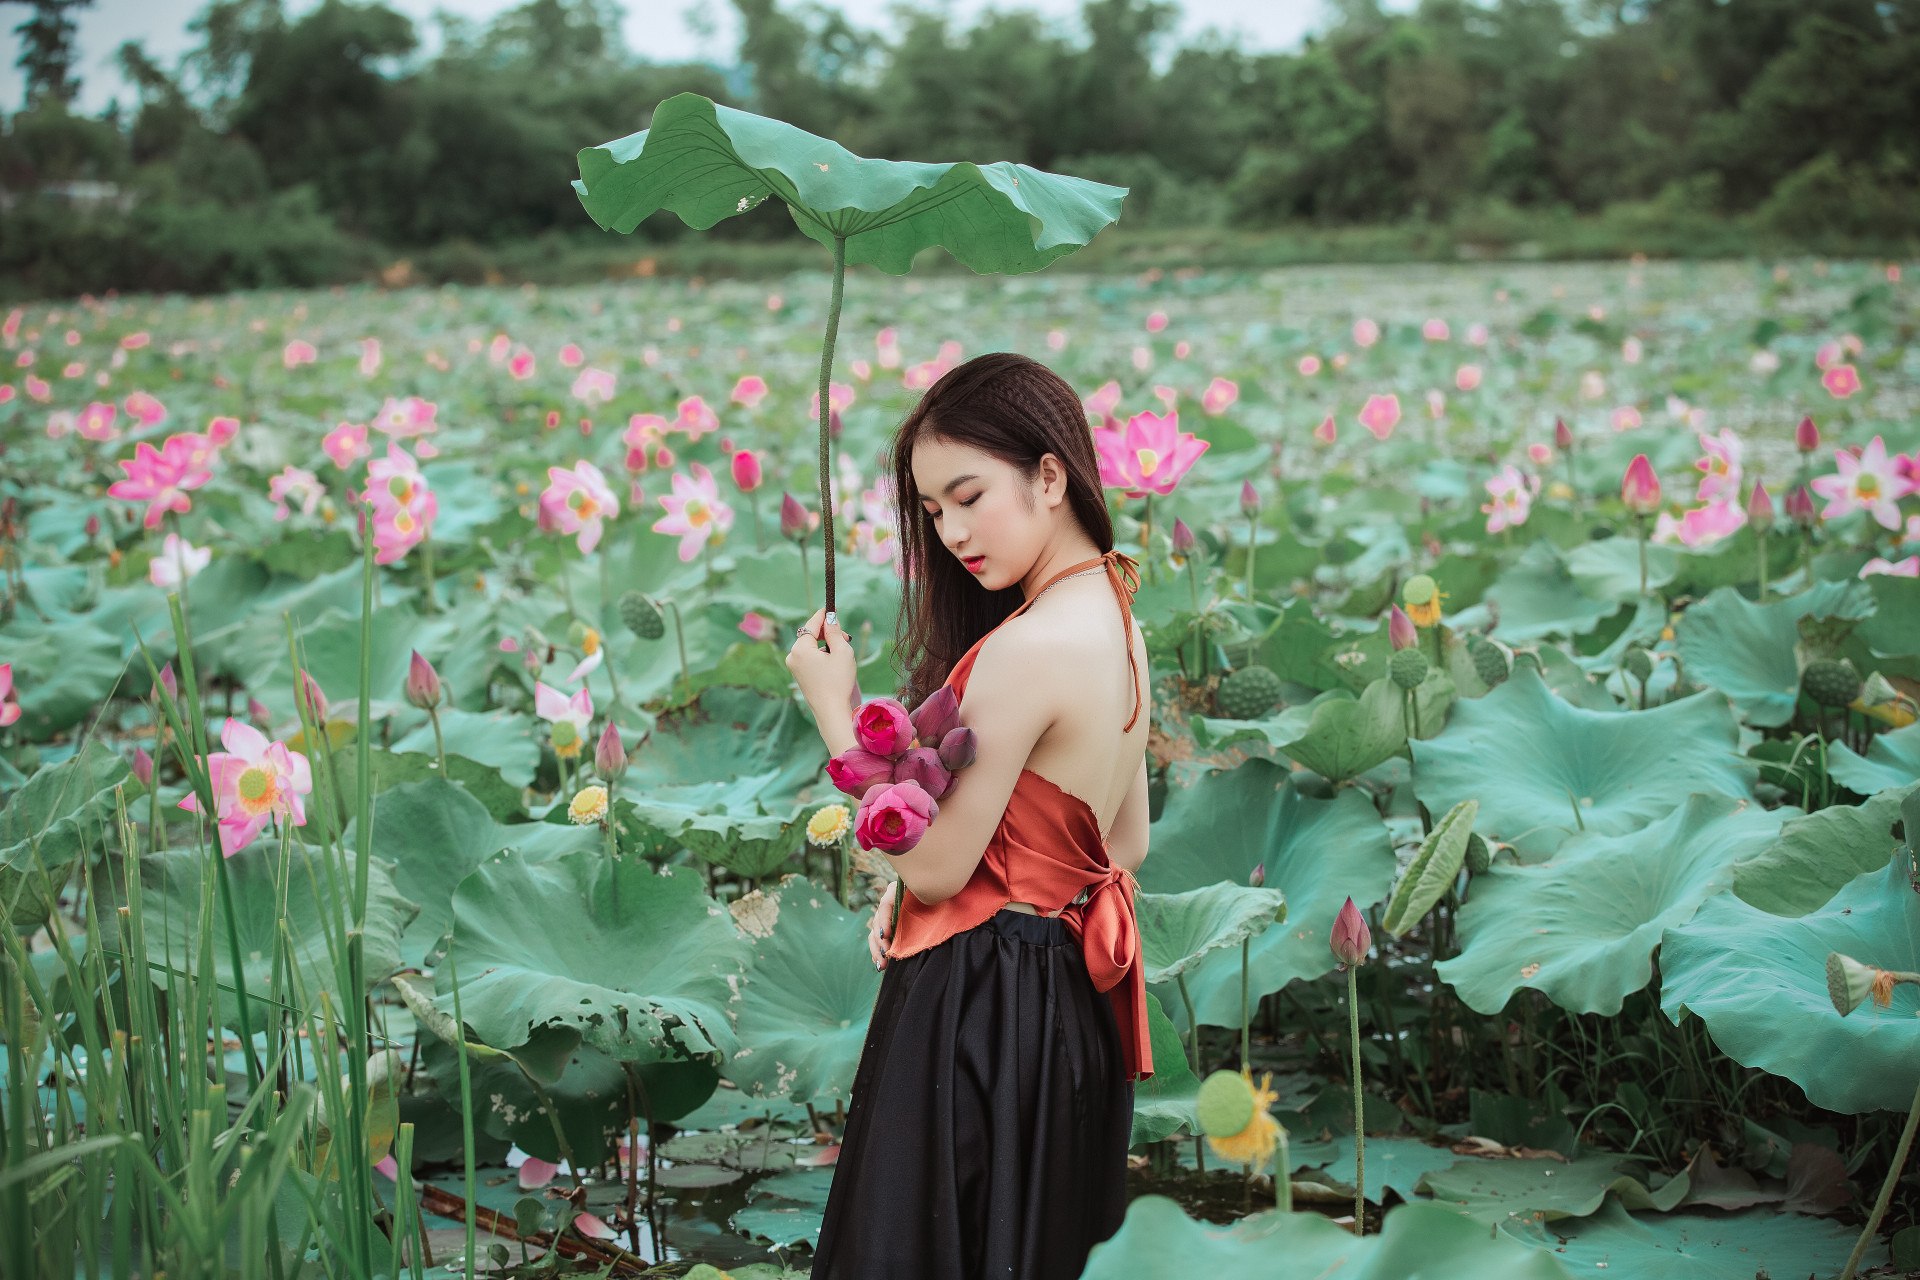 About Vietnamese Wives – Women That Make You Smile